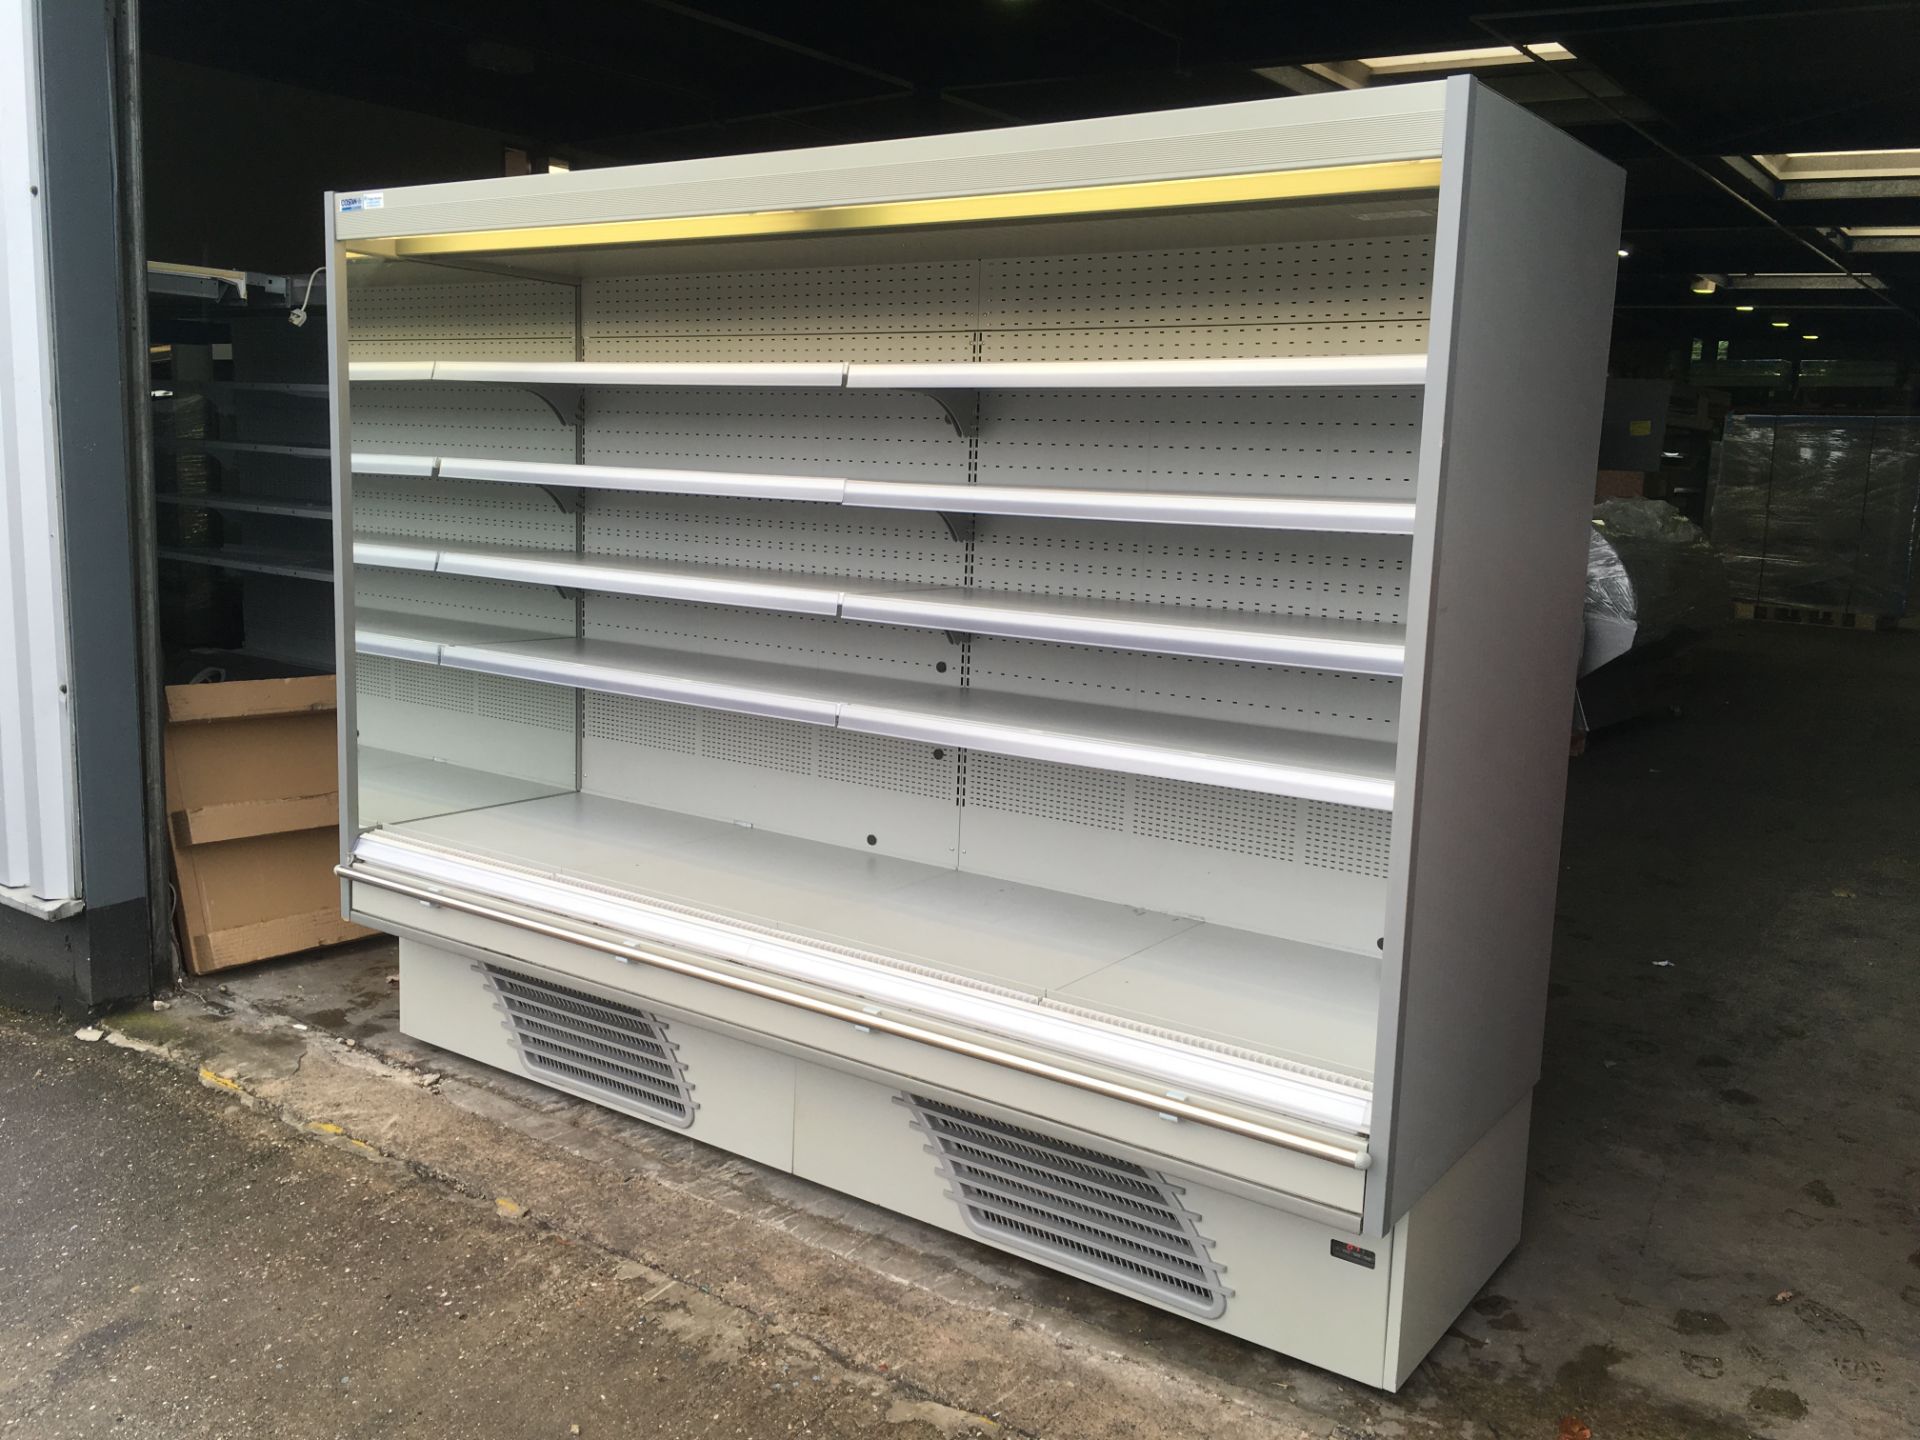 1 X Costan Ouverture integral Multi Deck Display Fridge - 2.5m wide (Grey colour) - Image 3 of 4